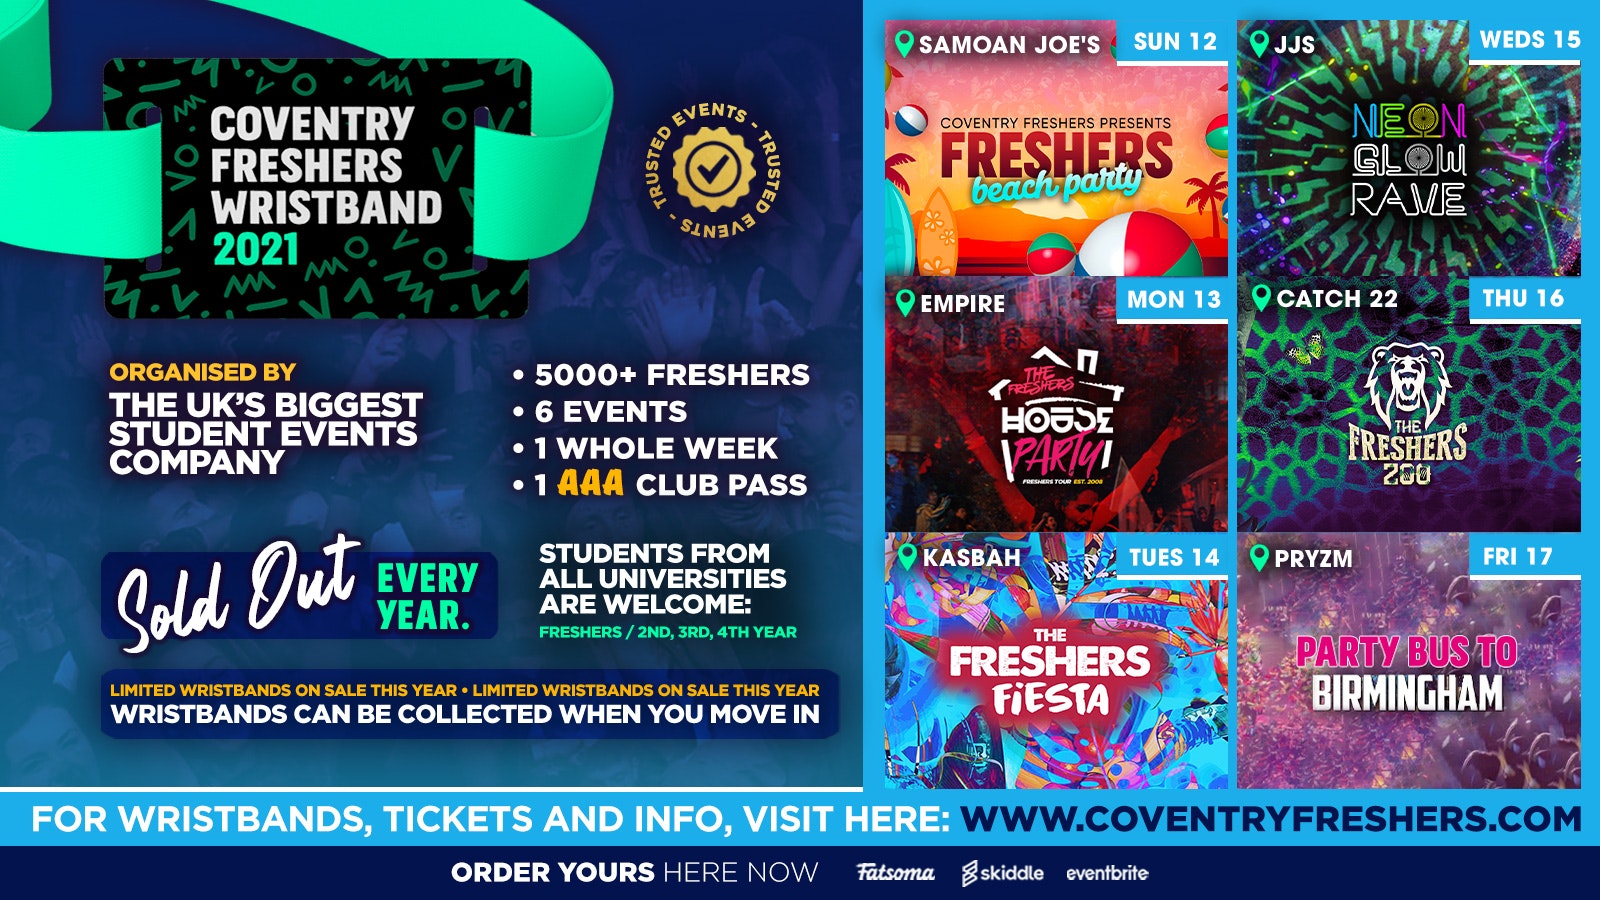 The Coventry Freshers Wristband // Coventry Freshers 2021 – Last FEW Wristbands!